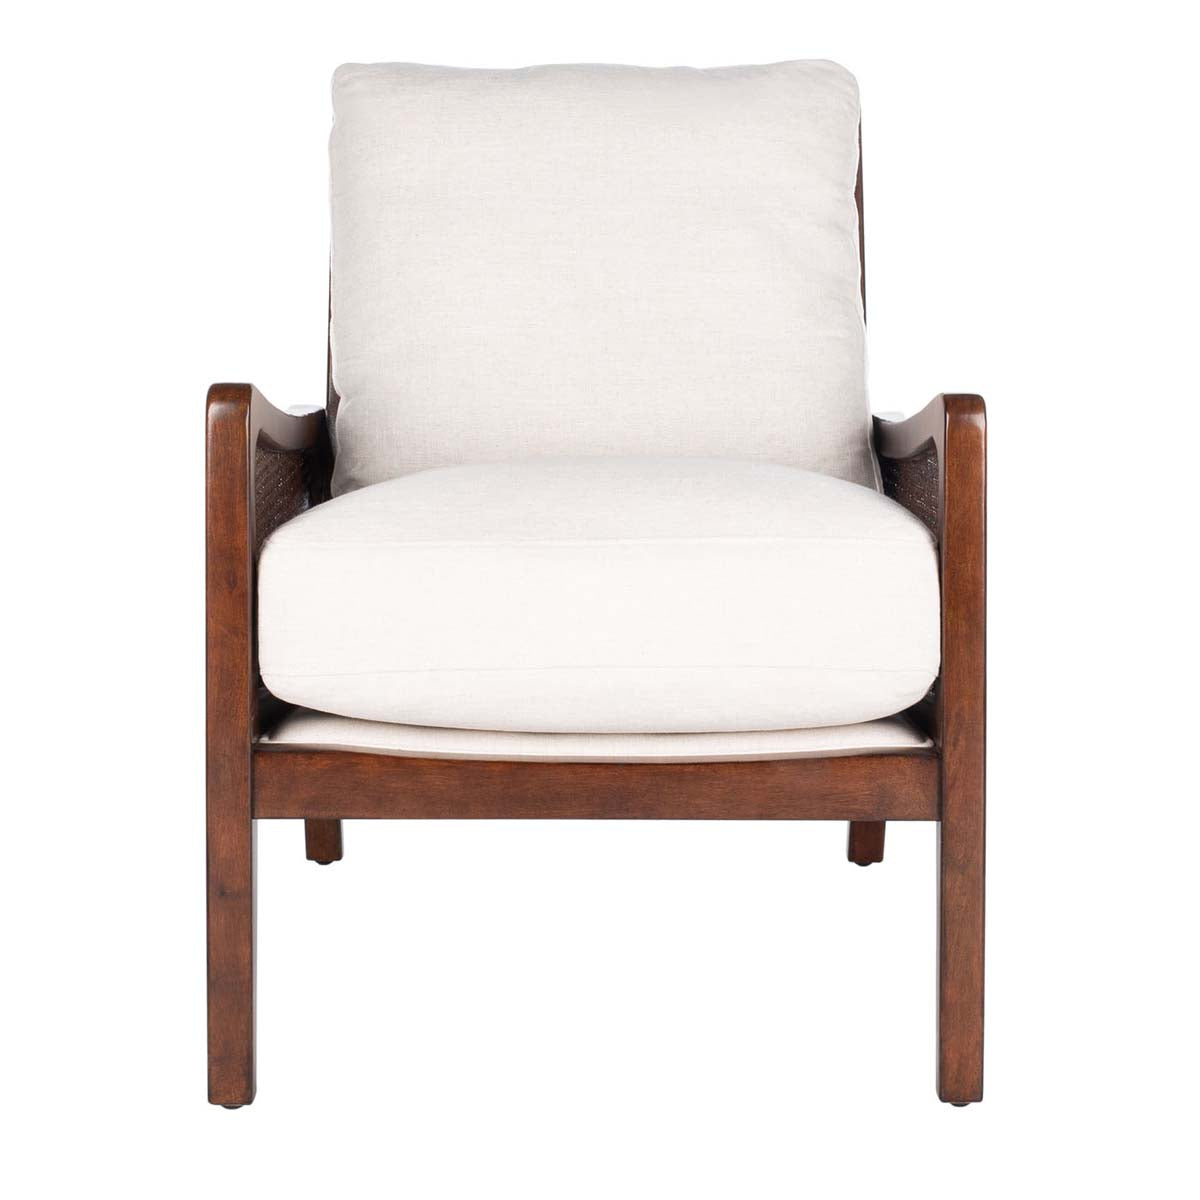 Safavieh Couture Moretti Wood Frame Accent Chair - Oatmeal